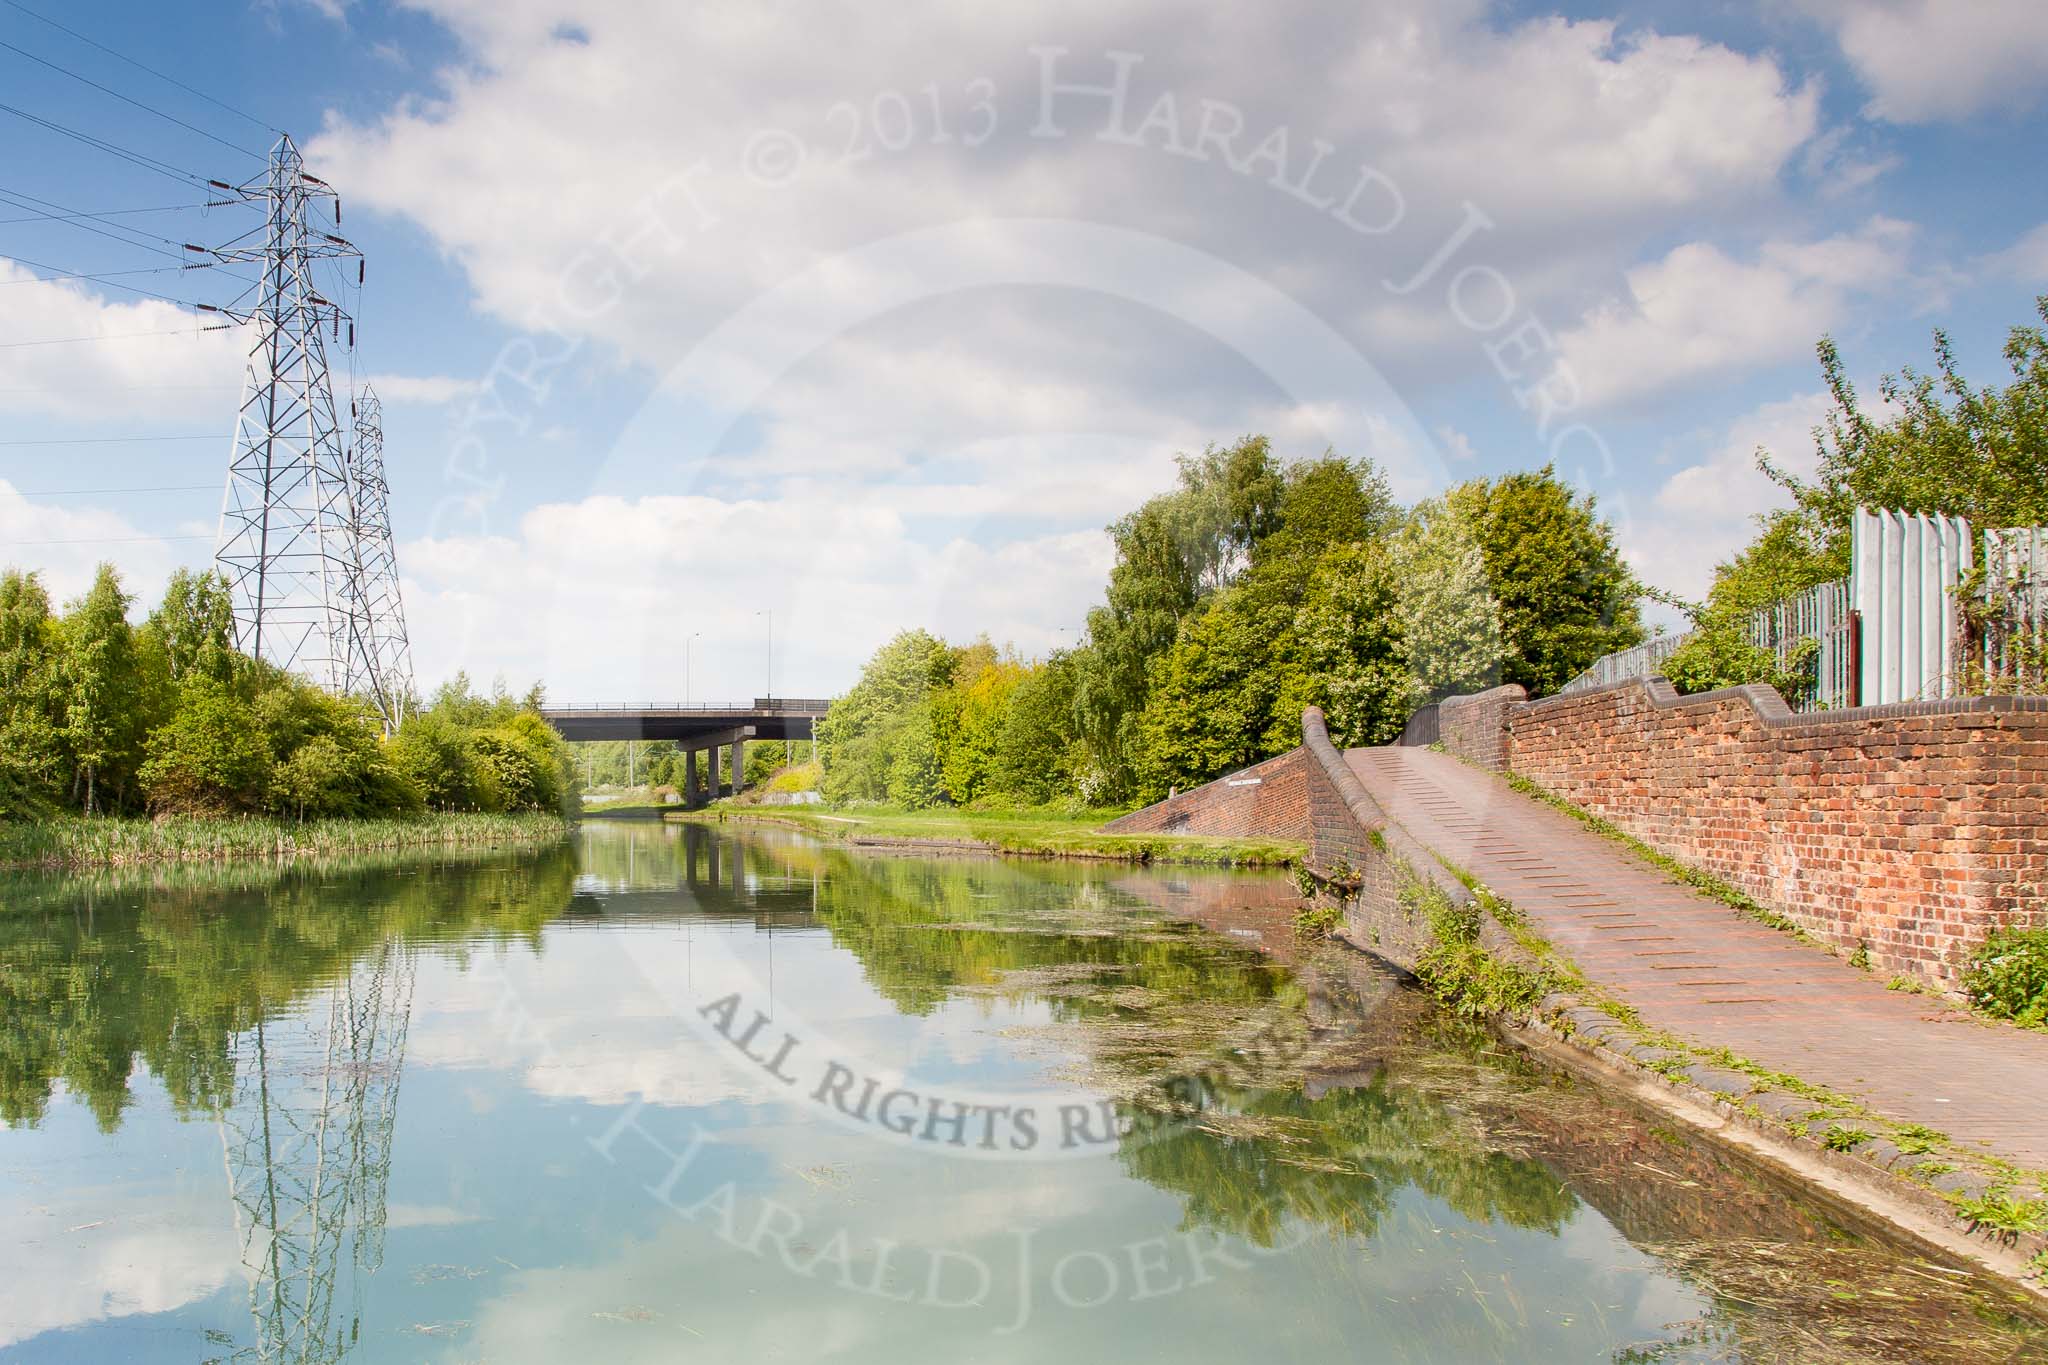 BCN Marathon Challenge 2013: Deepfields Junction, on the BCN New Main Line, where the former Wednesbury Oak Loop, now called the Bradley Arm, joins..
Birmingham Canal Navigation,


United Kingdom,
on 25 May 2013 at 15:20, image #209